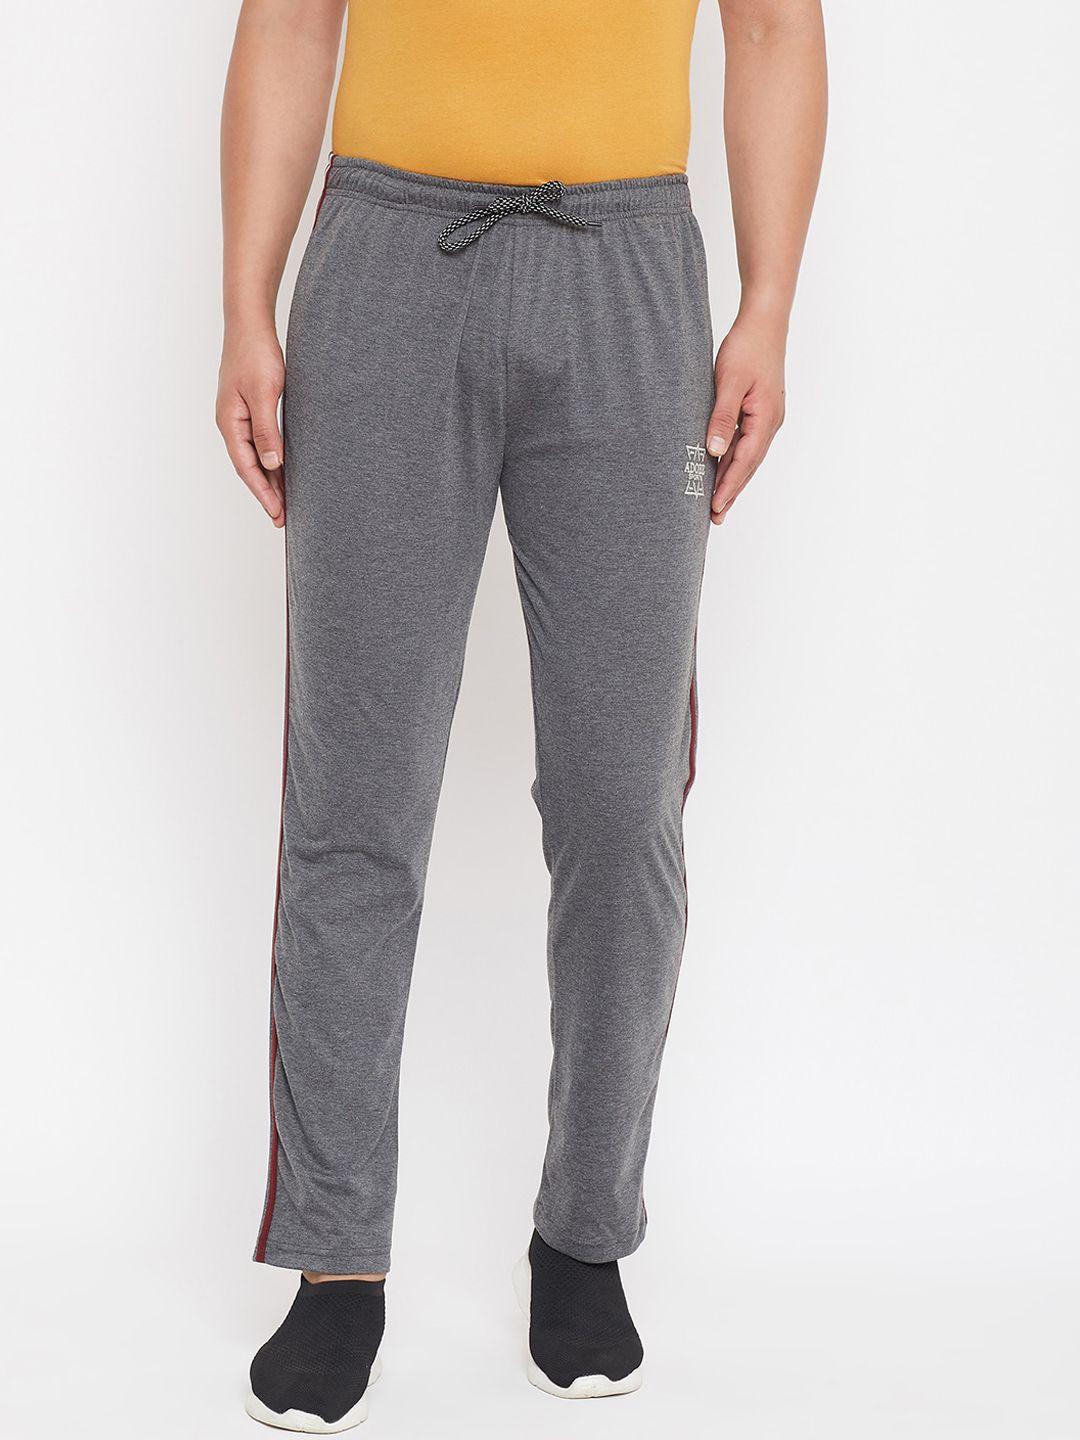 adobe-men-charcoal-grey-solid-straight-fit-track-pants